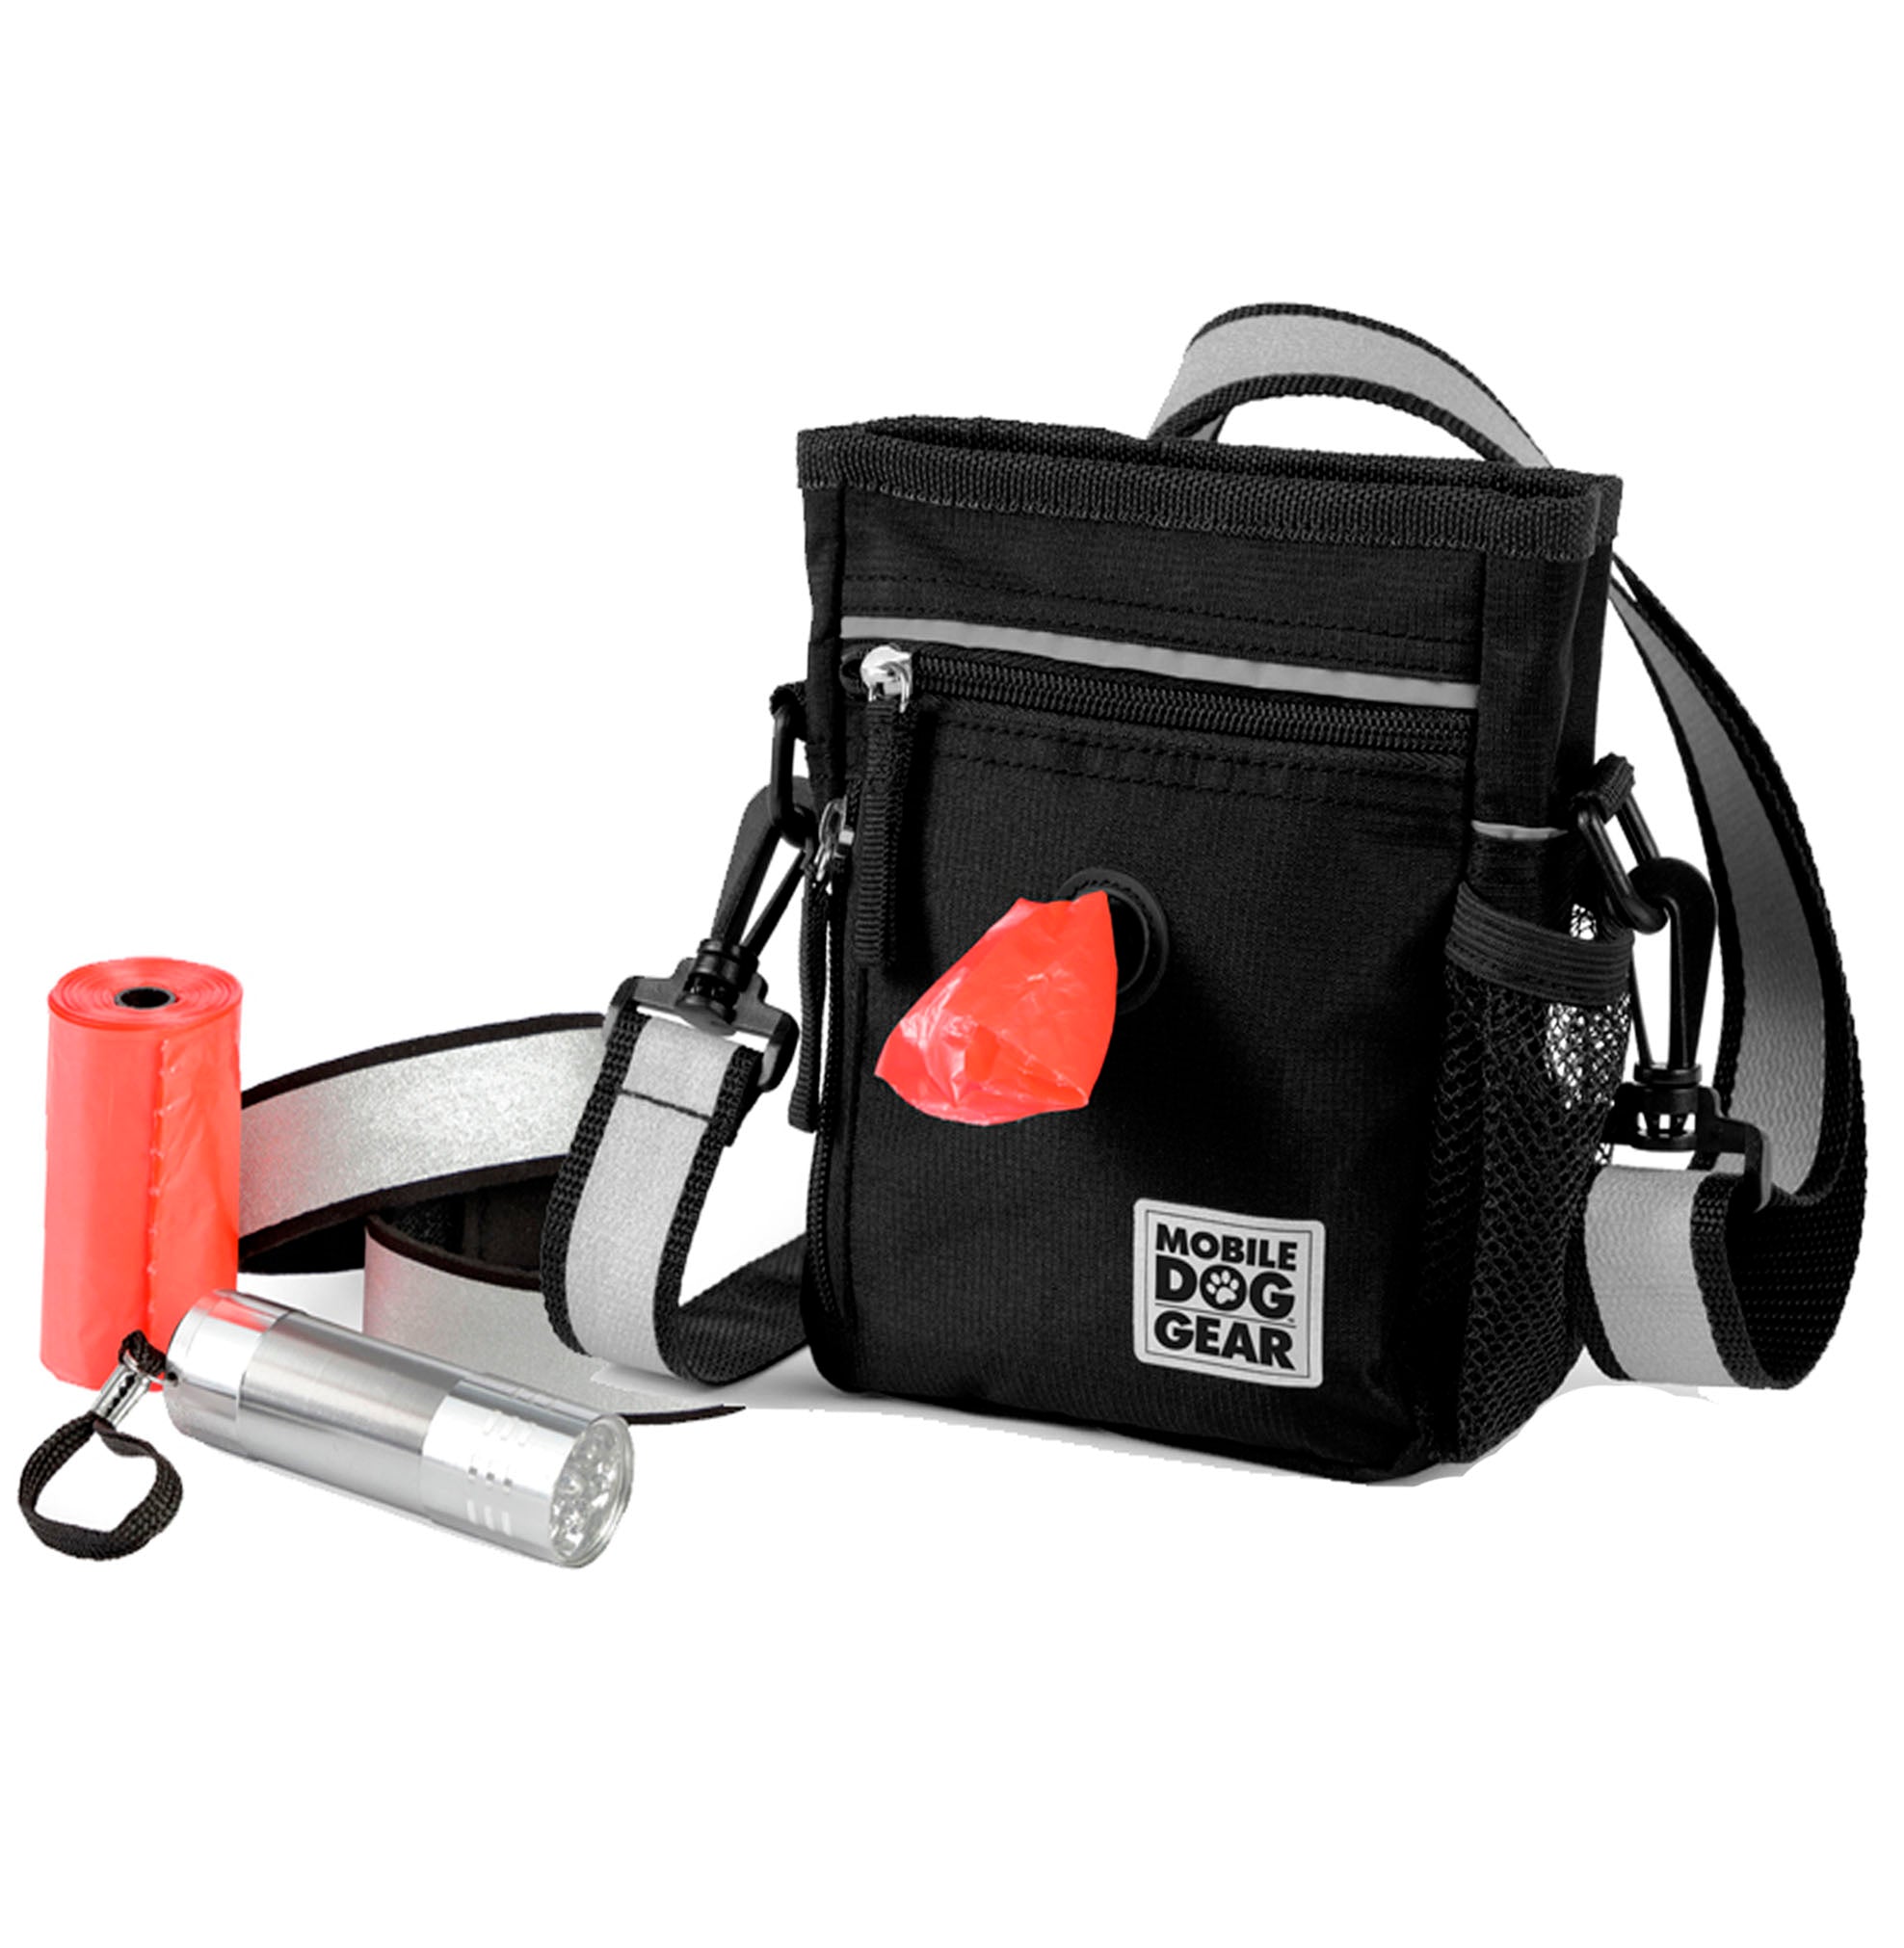 The dog-walking bag includes a removable, also reflective, shoulder strap, two reflective wrist traps, and a pocket-size flashlight. The bag also includes a compartment to easily store and pull out dog waste bags from the side as needed. Product presented in black.